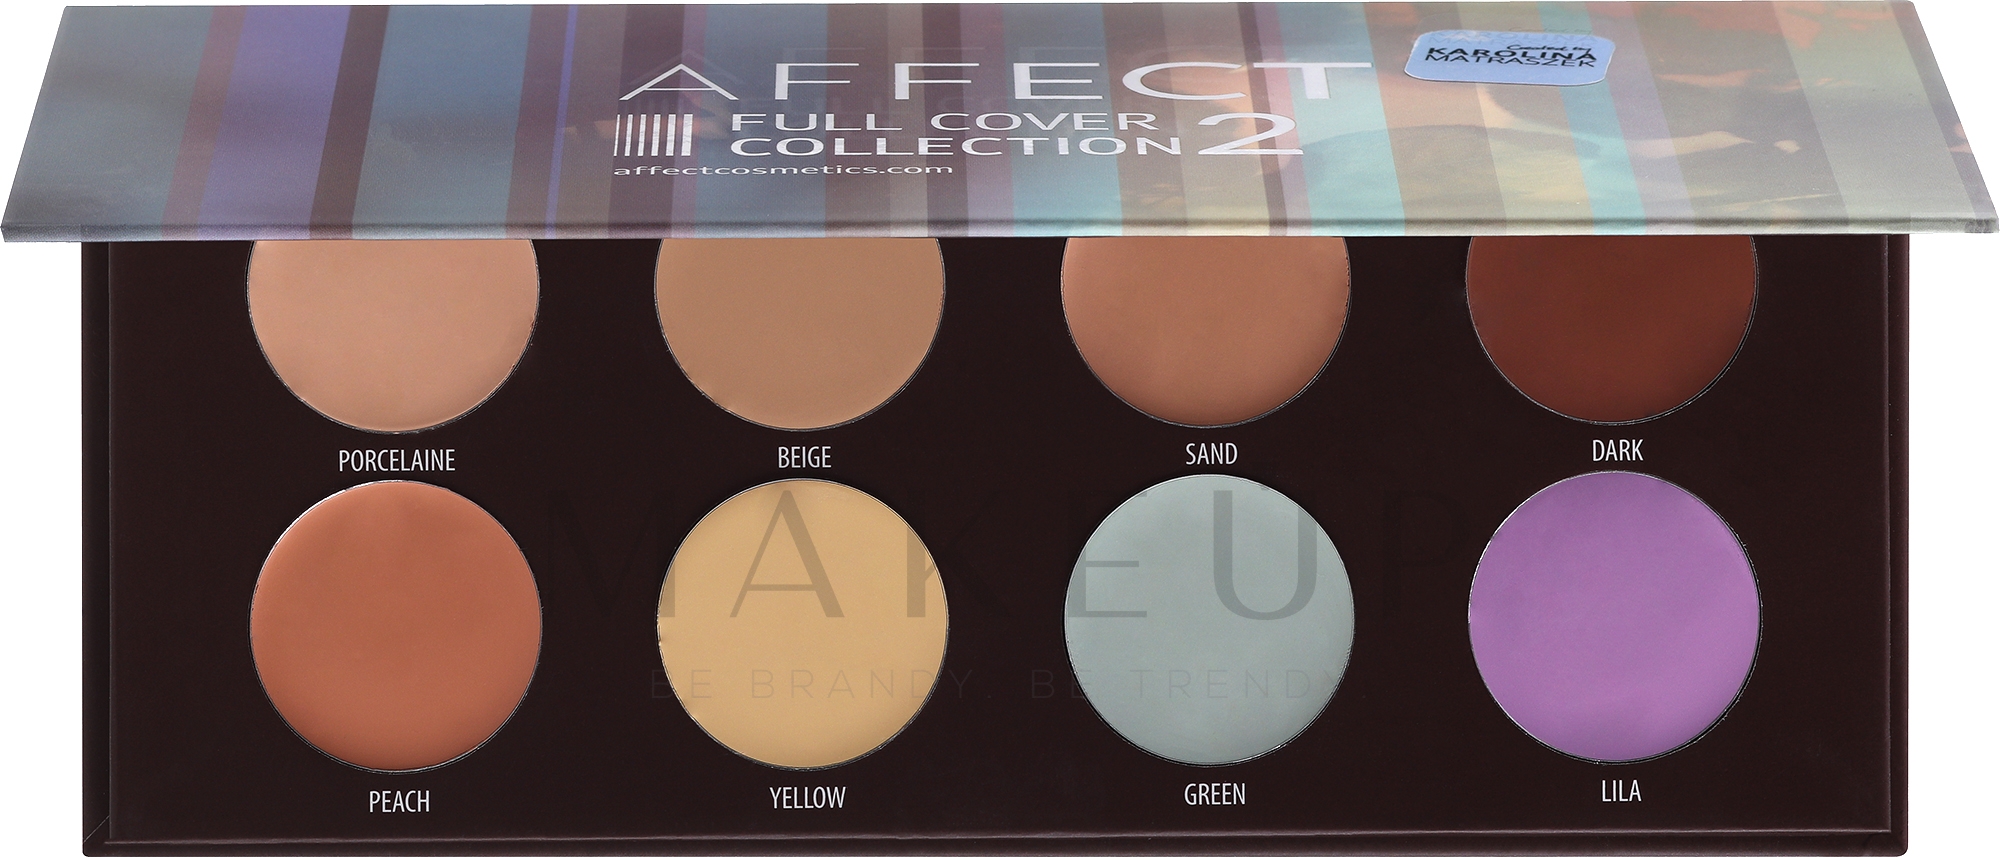 Gesichtsconcealer-Palette - Affect Cosmetics Full Cover Collection 2 — Bild 8 x 2.7 g